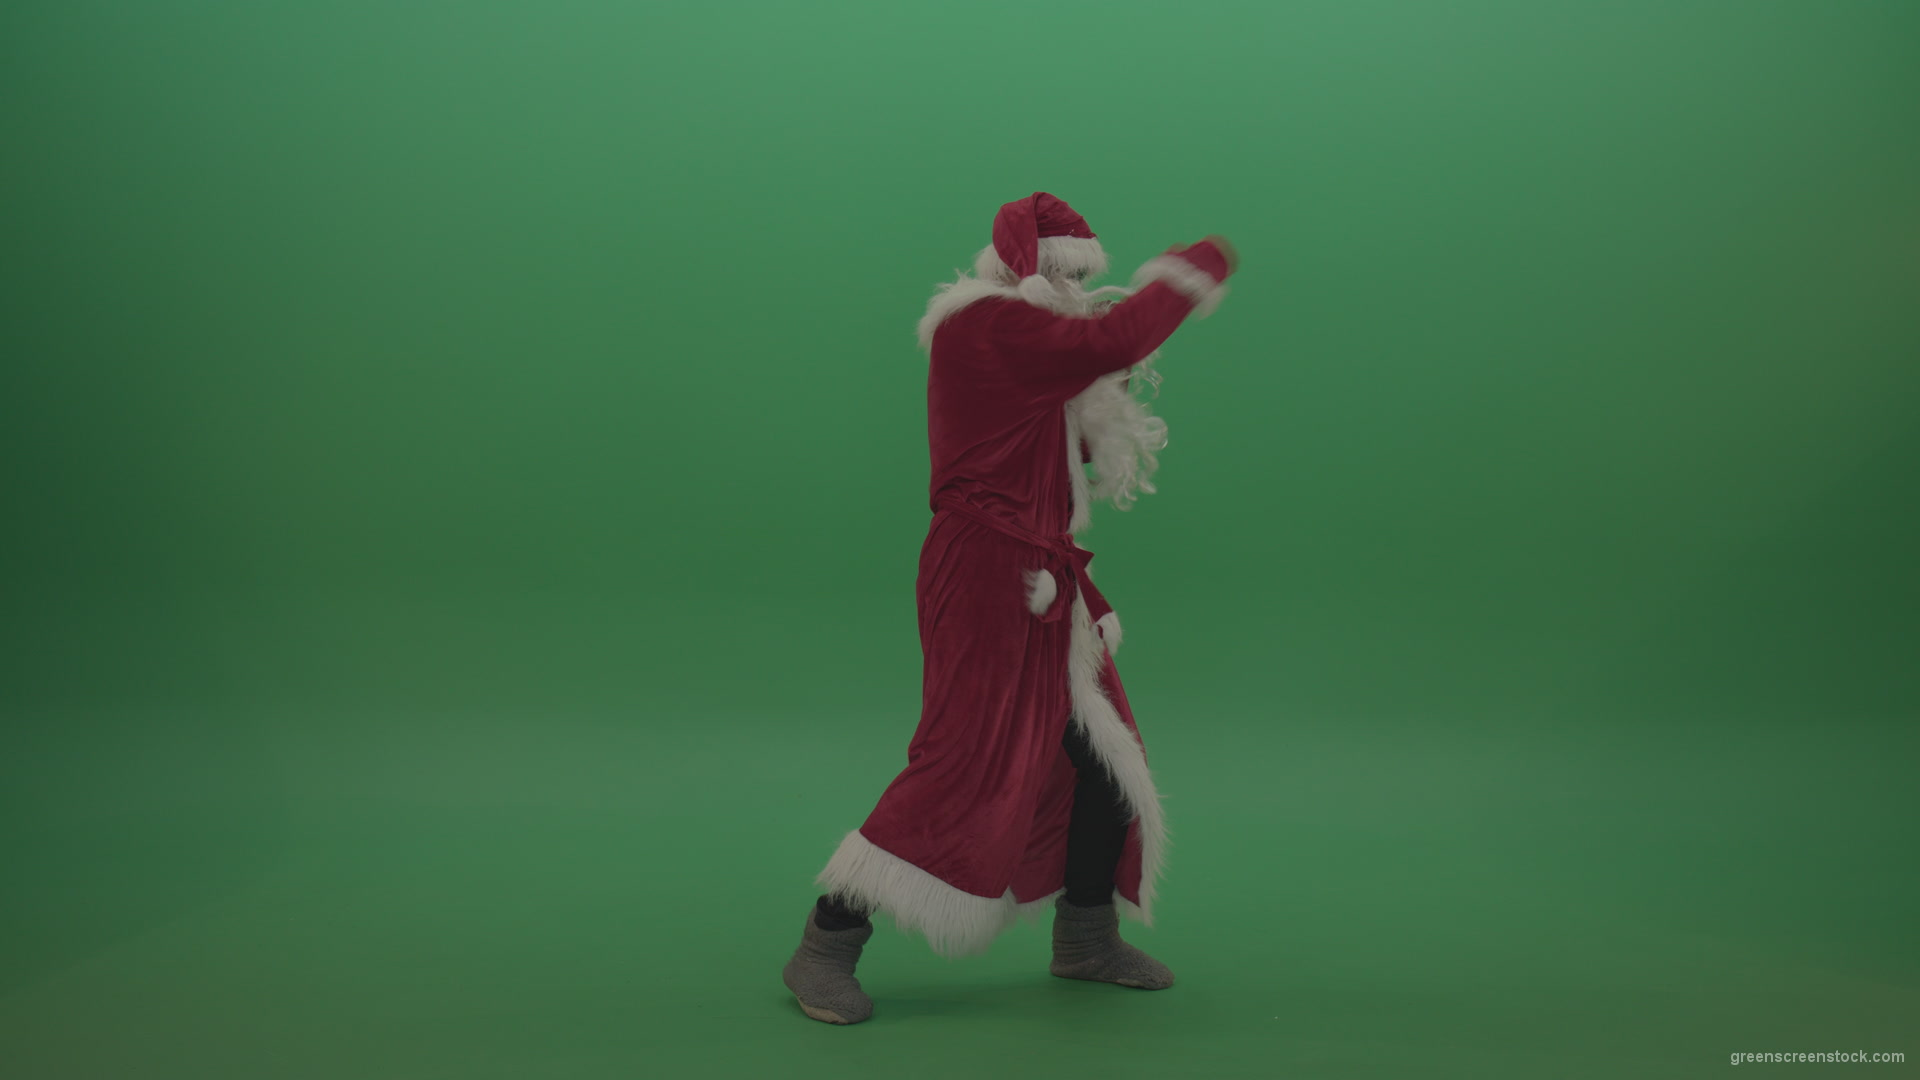 Santa-in-black-glasses-show-cases-his-boxing-skills-over-chromakey-background_006 Green Screen Stock